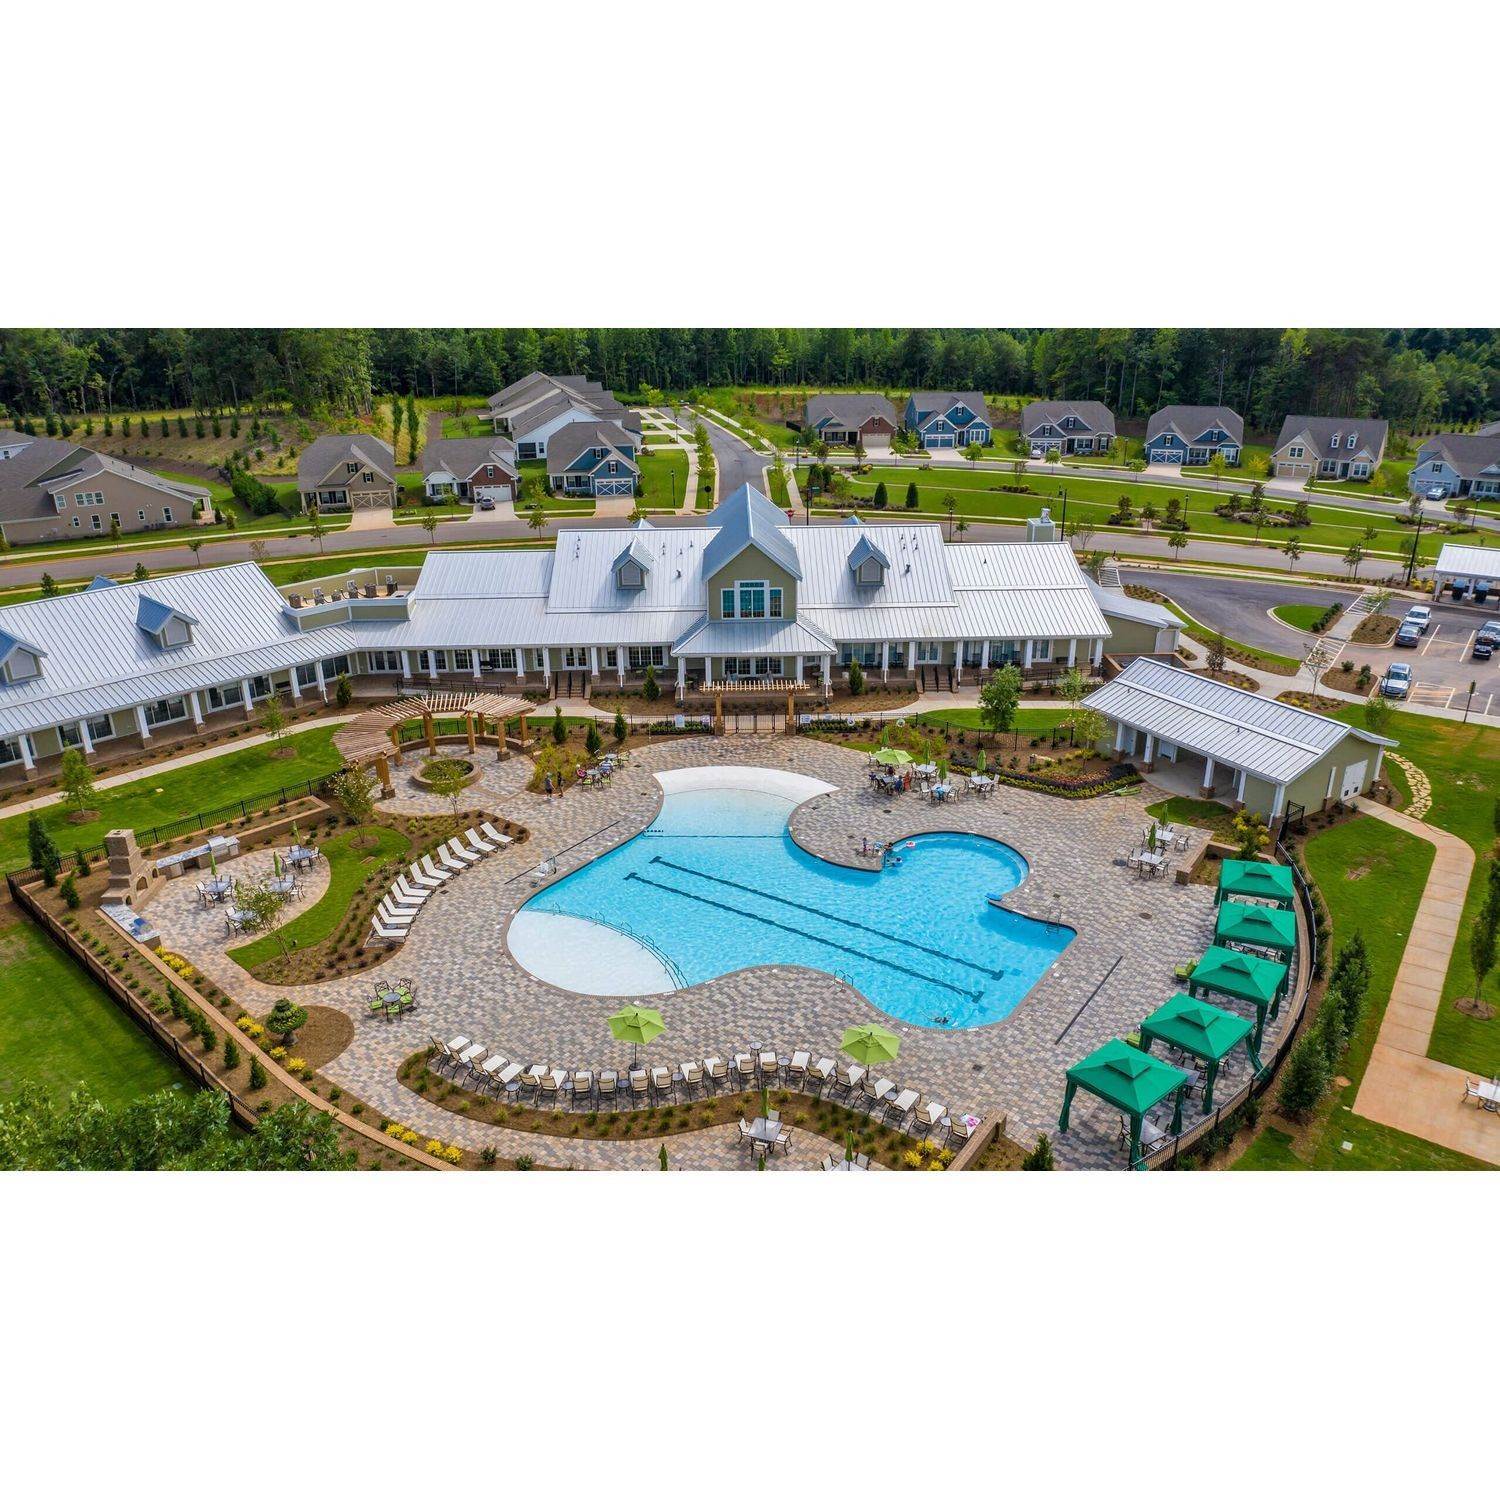 17. Cresswind Charlotte building at 8913 Silver Springs Court, Charlotte, NC 28215